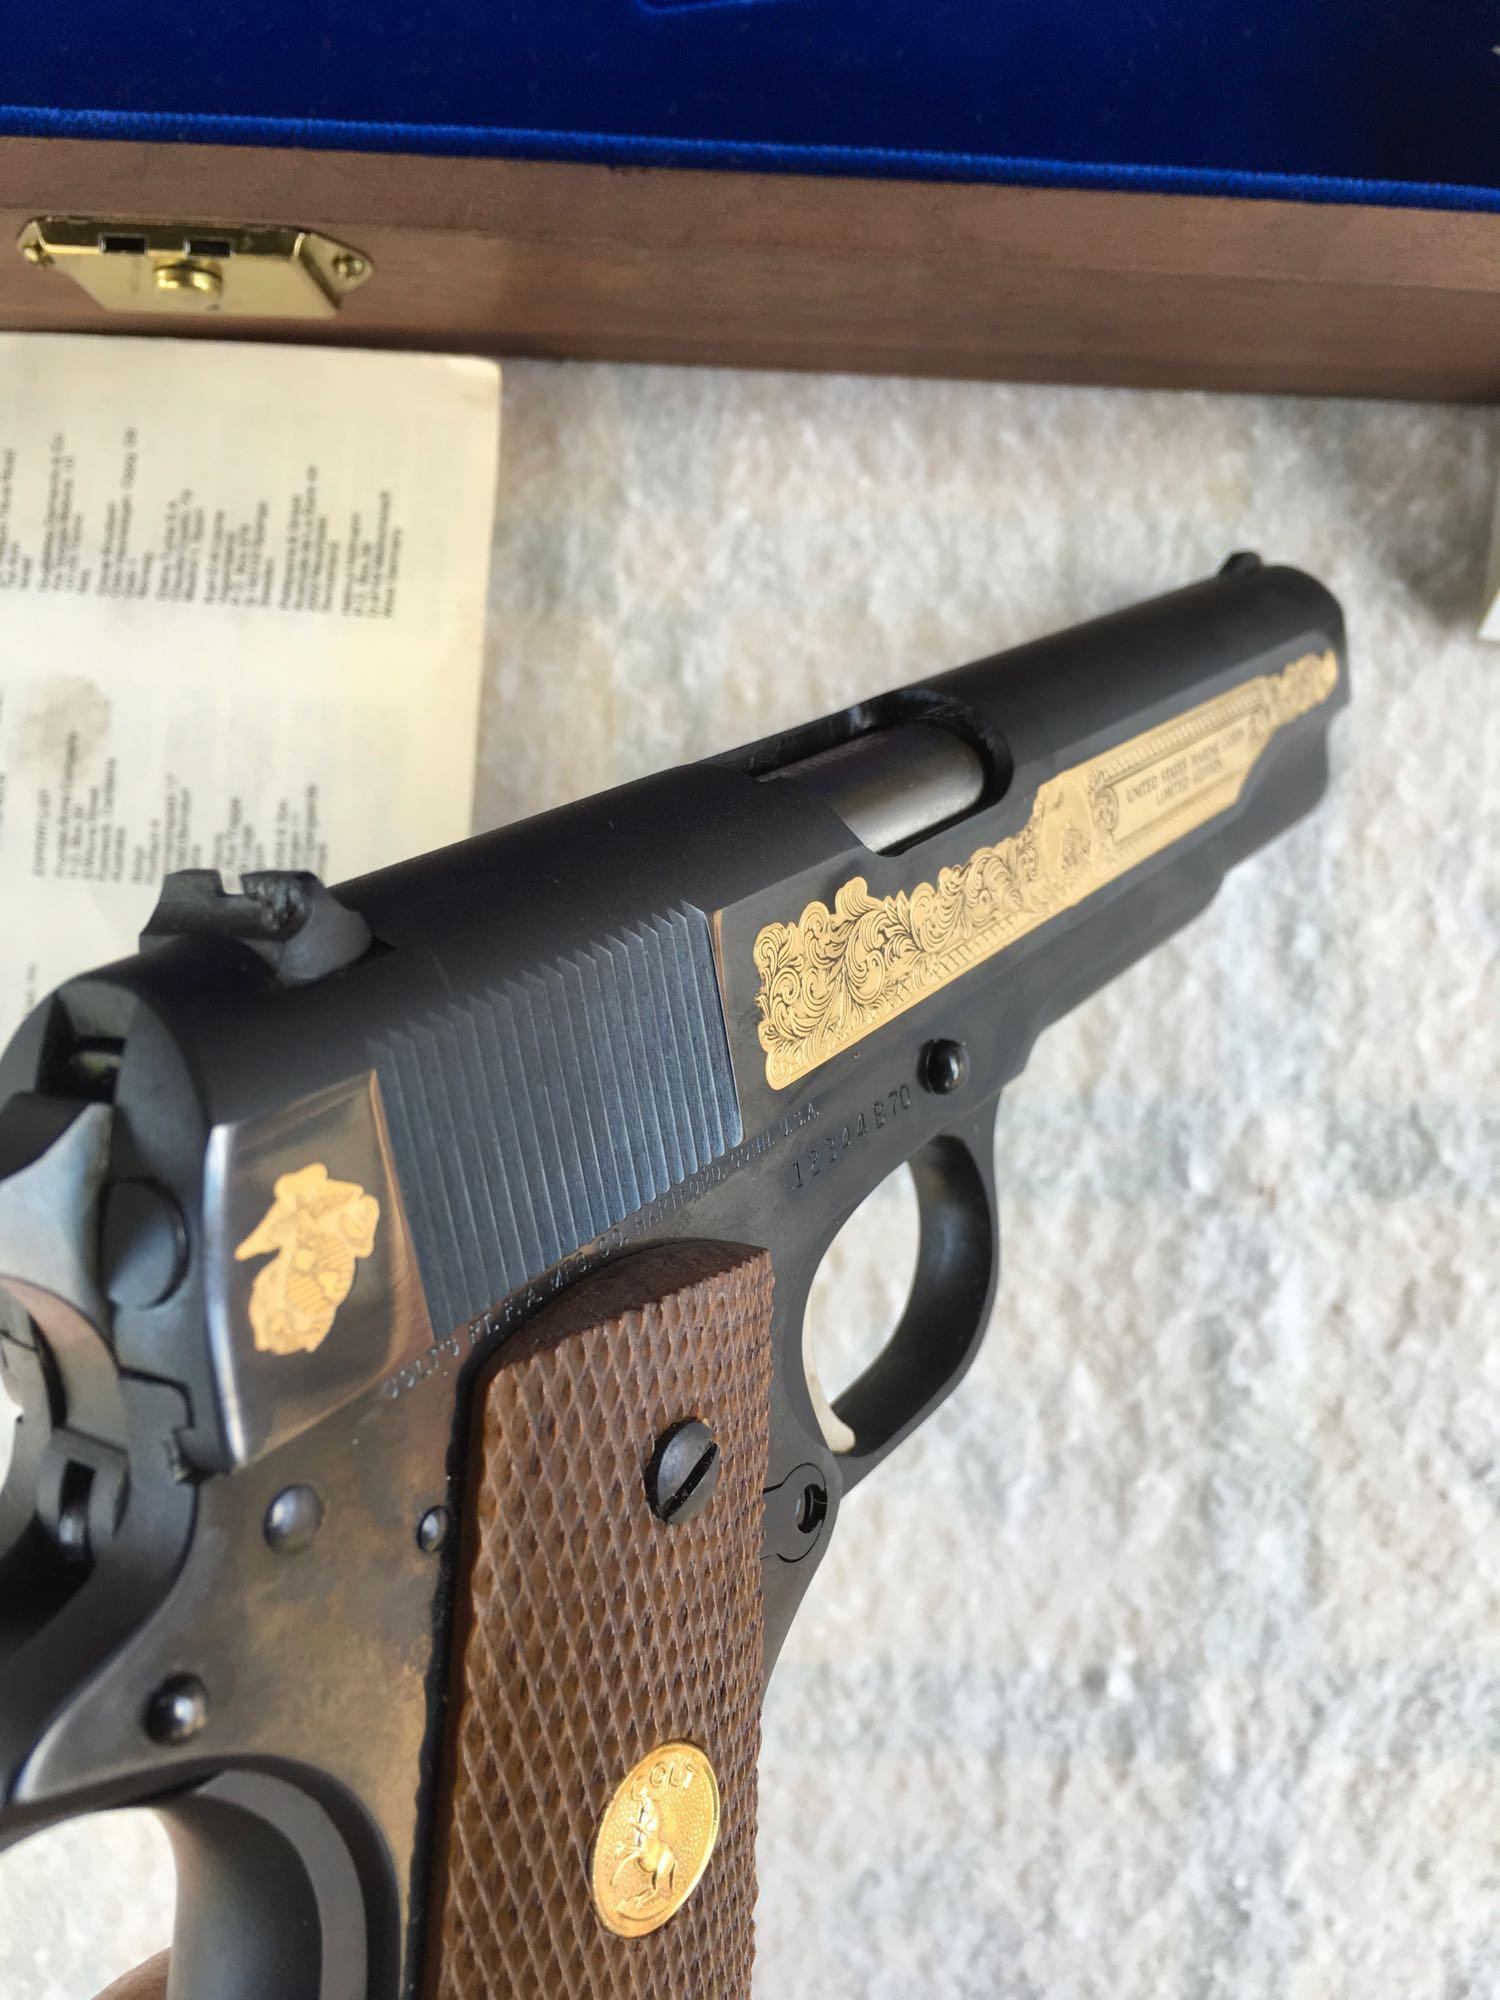 Colt 1911 USMC Limited Edition w case/key. Serial #12344B70 Off Roster, Not for sale in California